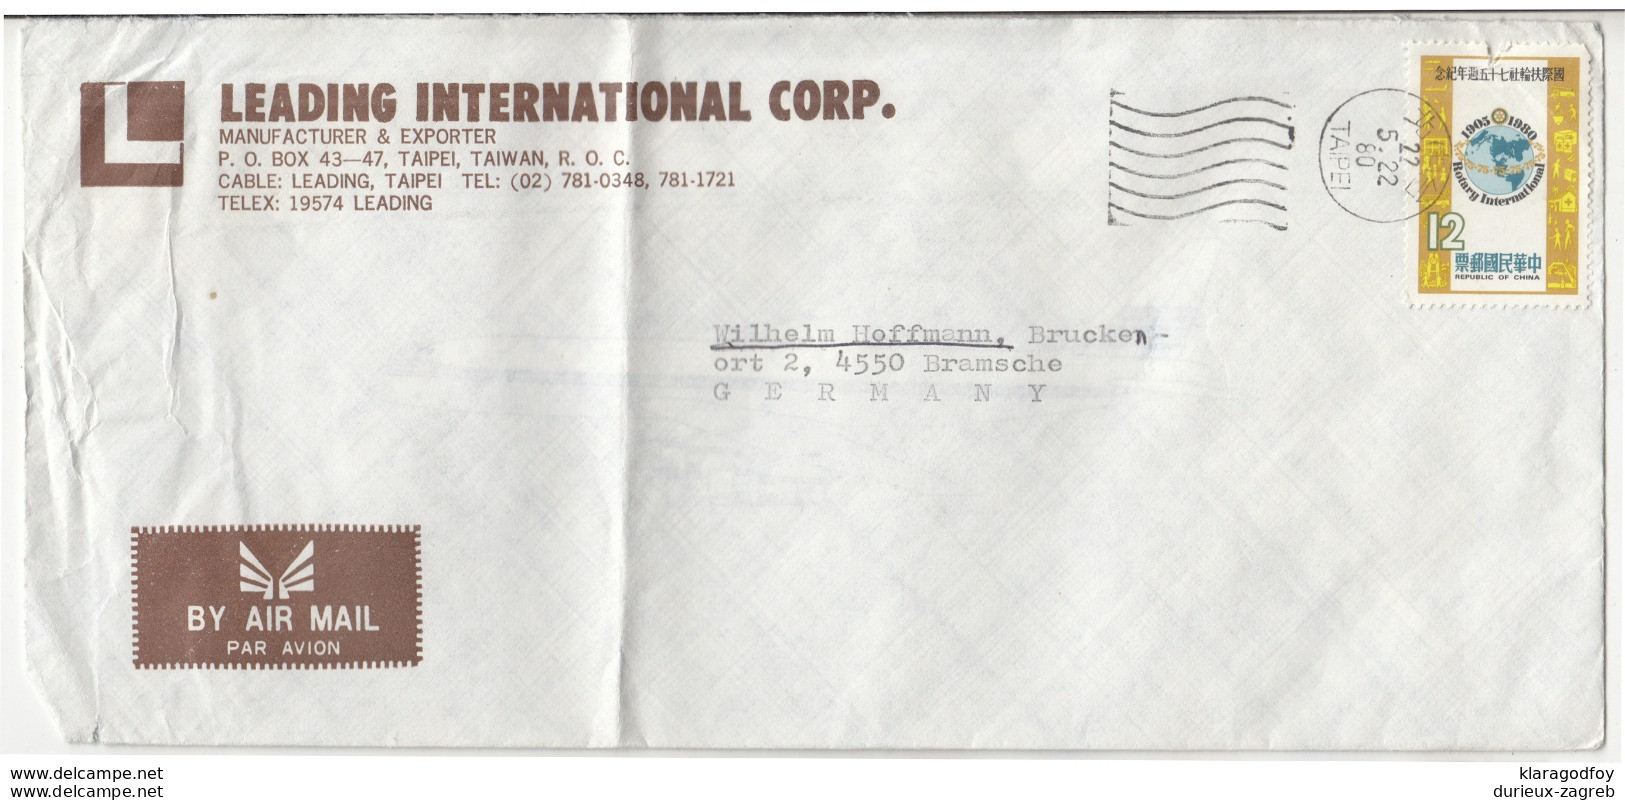 Leading International Taipei Company Air Mail Letter Cover Travelled 1980? To Germany B190922 - Covers & Documents